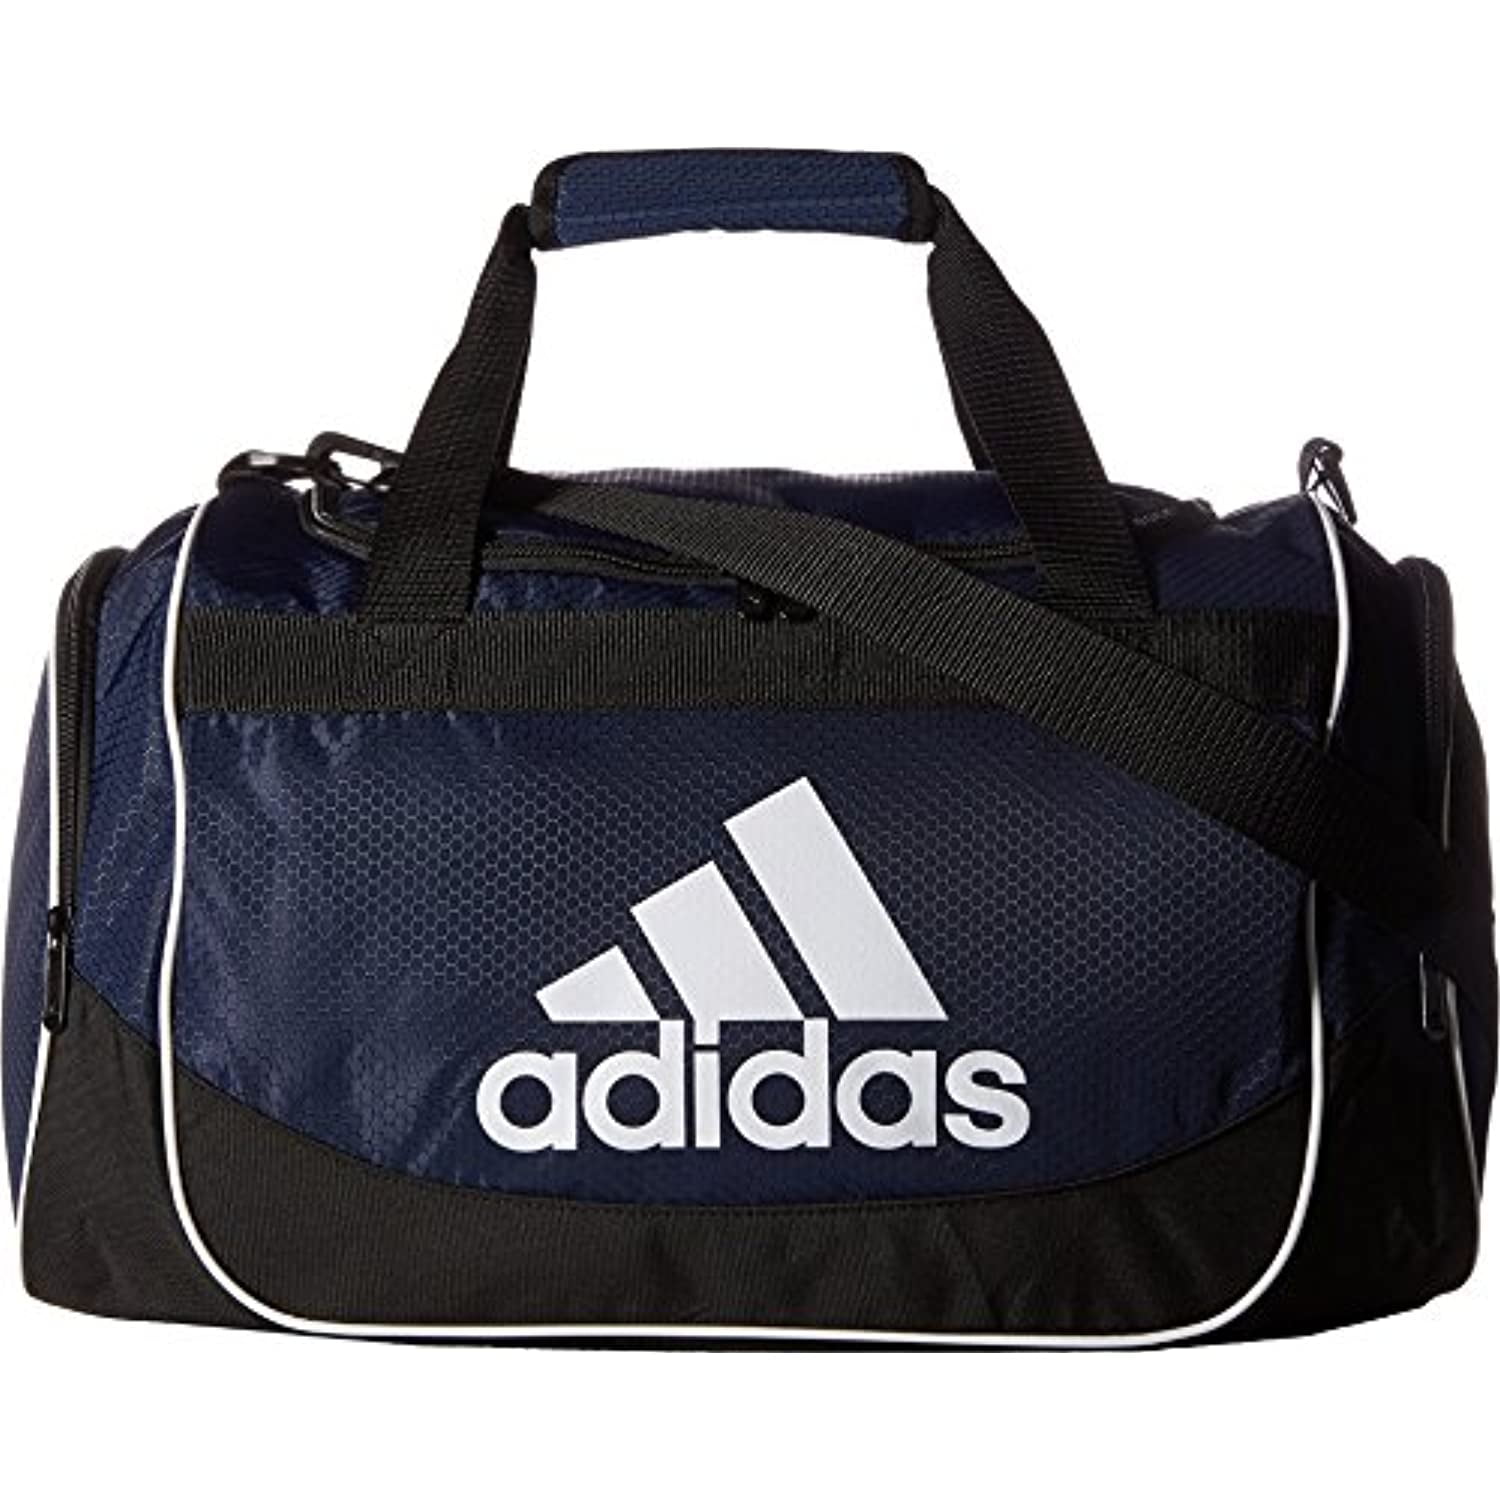 adidas Adult Defender Iv Small Duffel Bag in Blue Save 50% Womens Bags Duffel bags and weekend bags 